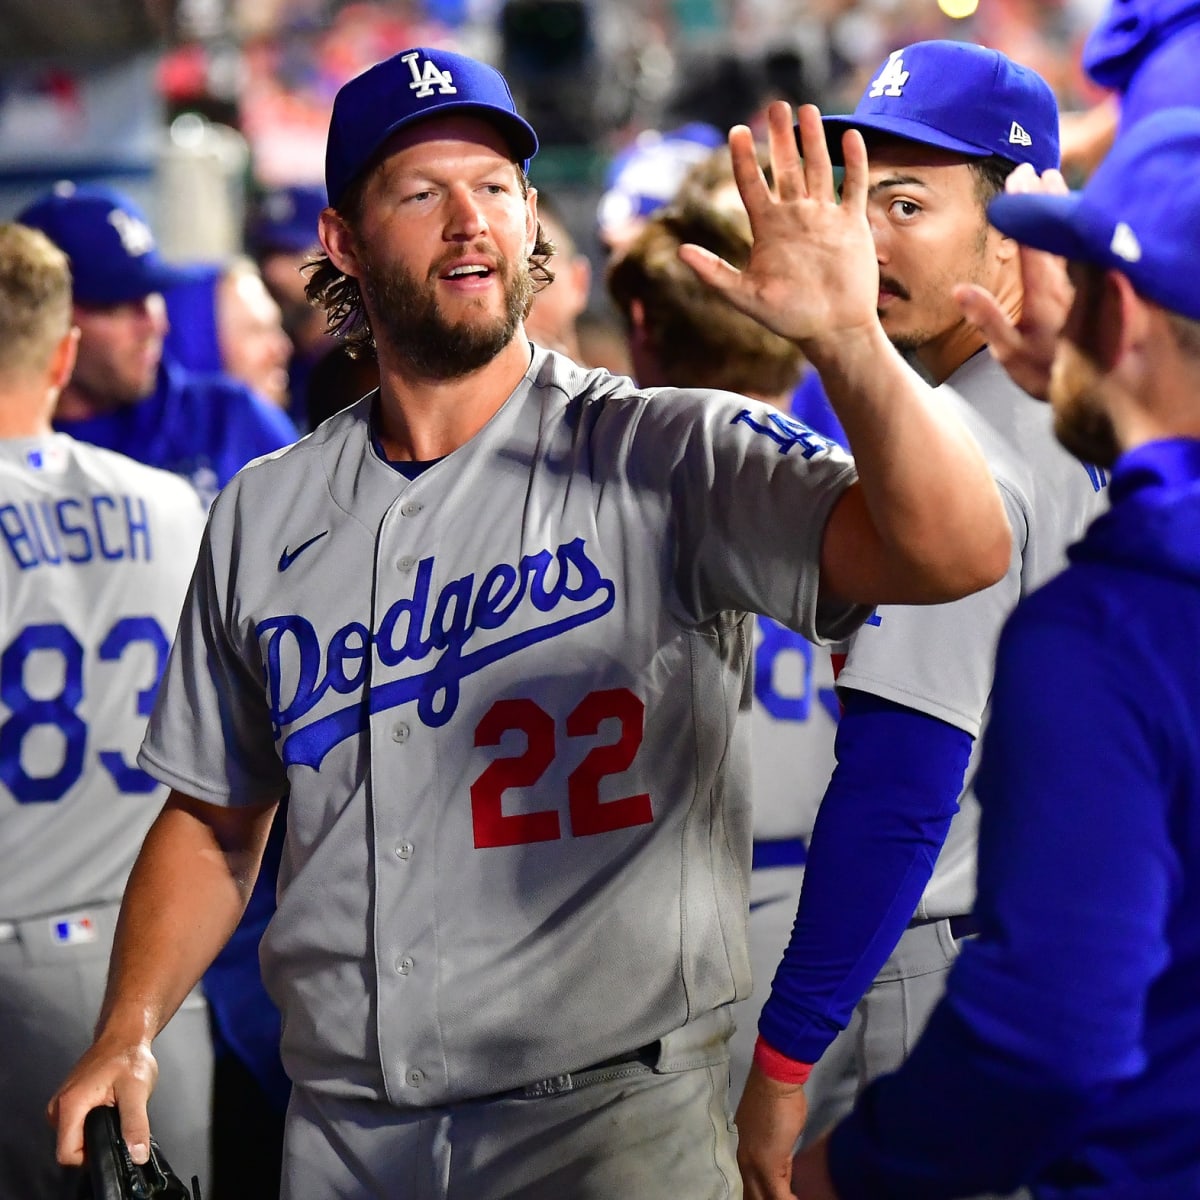 Dodgers news: All-Star rosters, losses to Royals, Clayton Kershaw